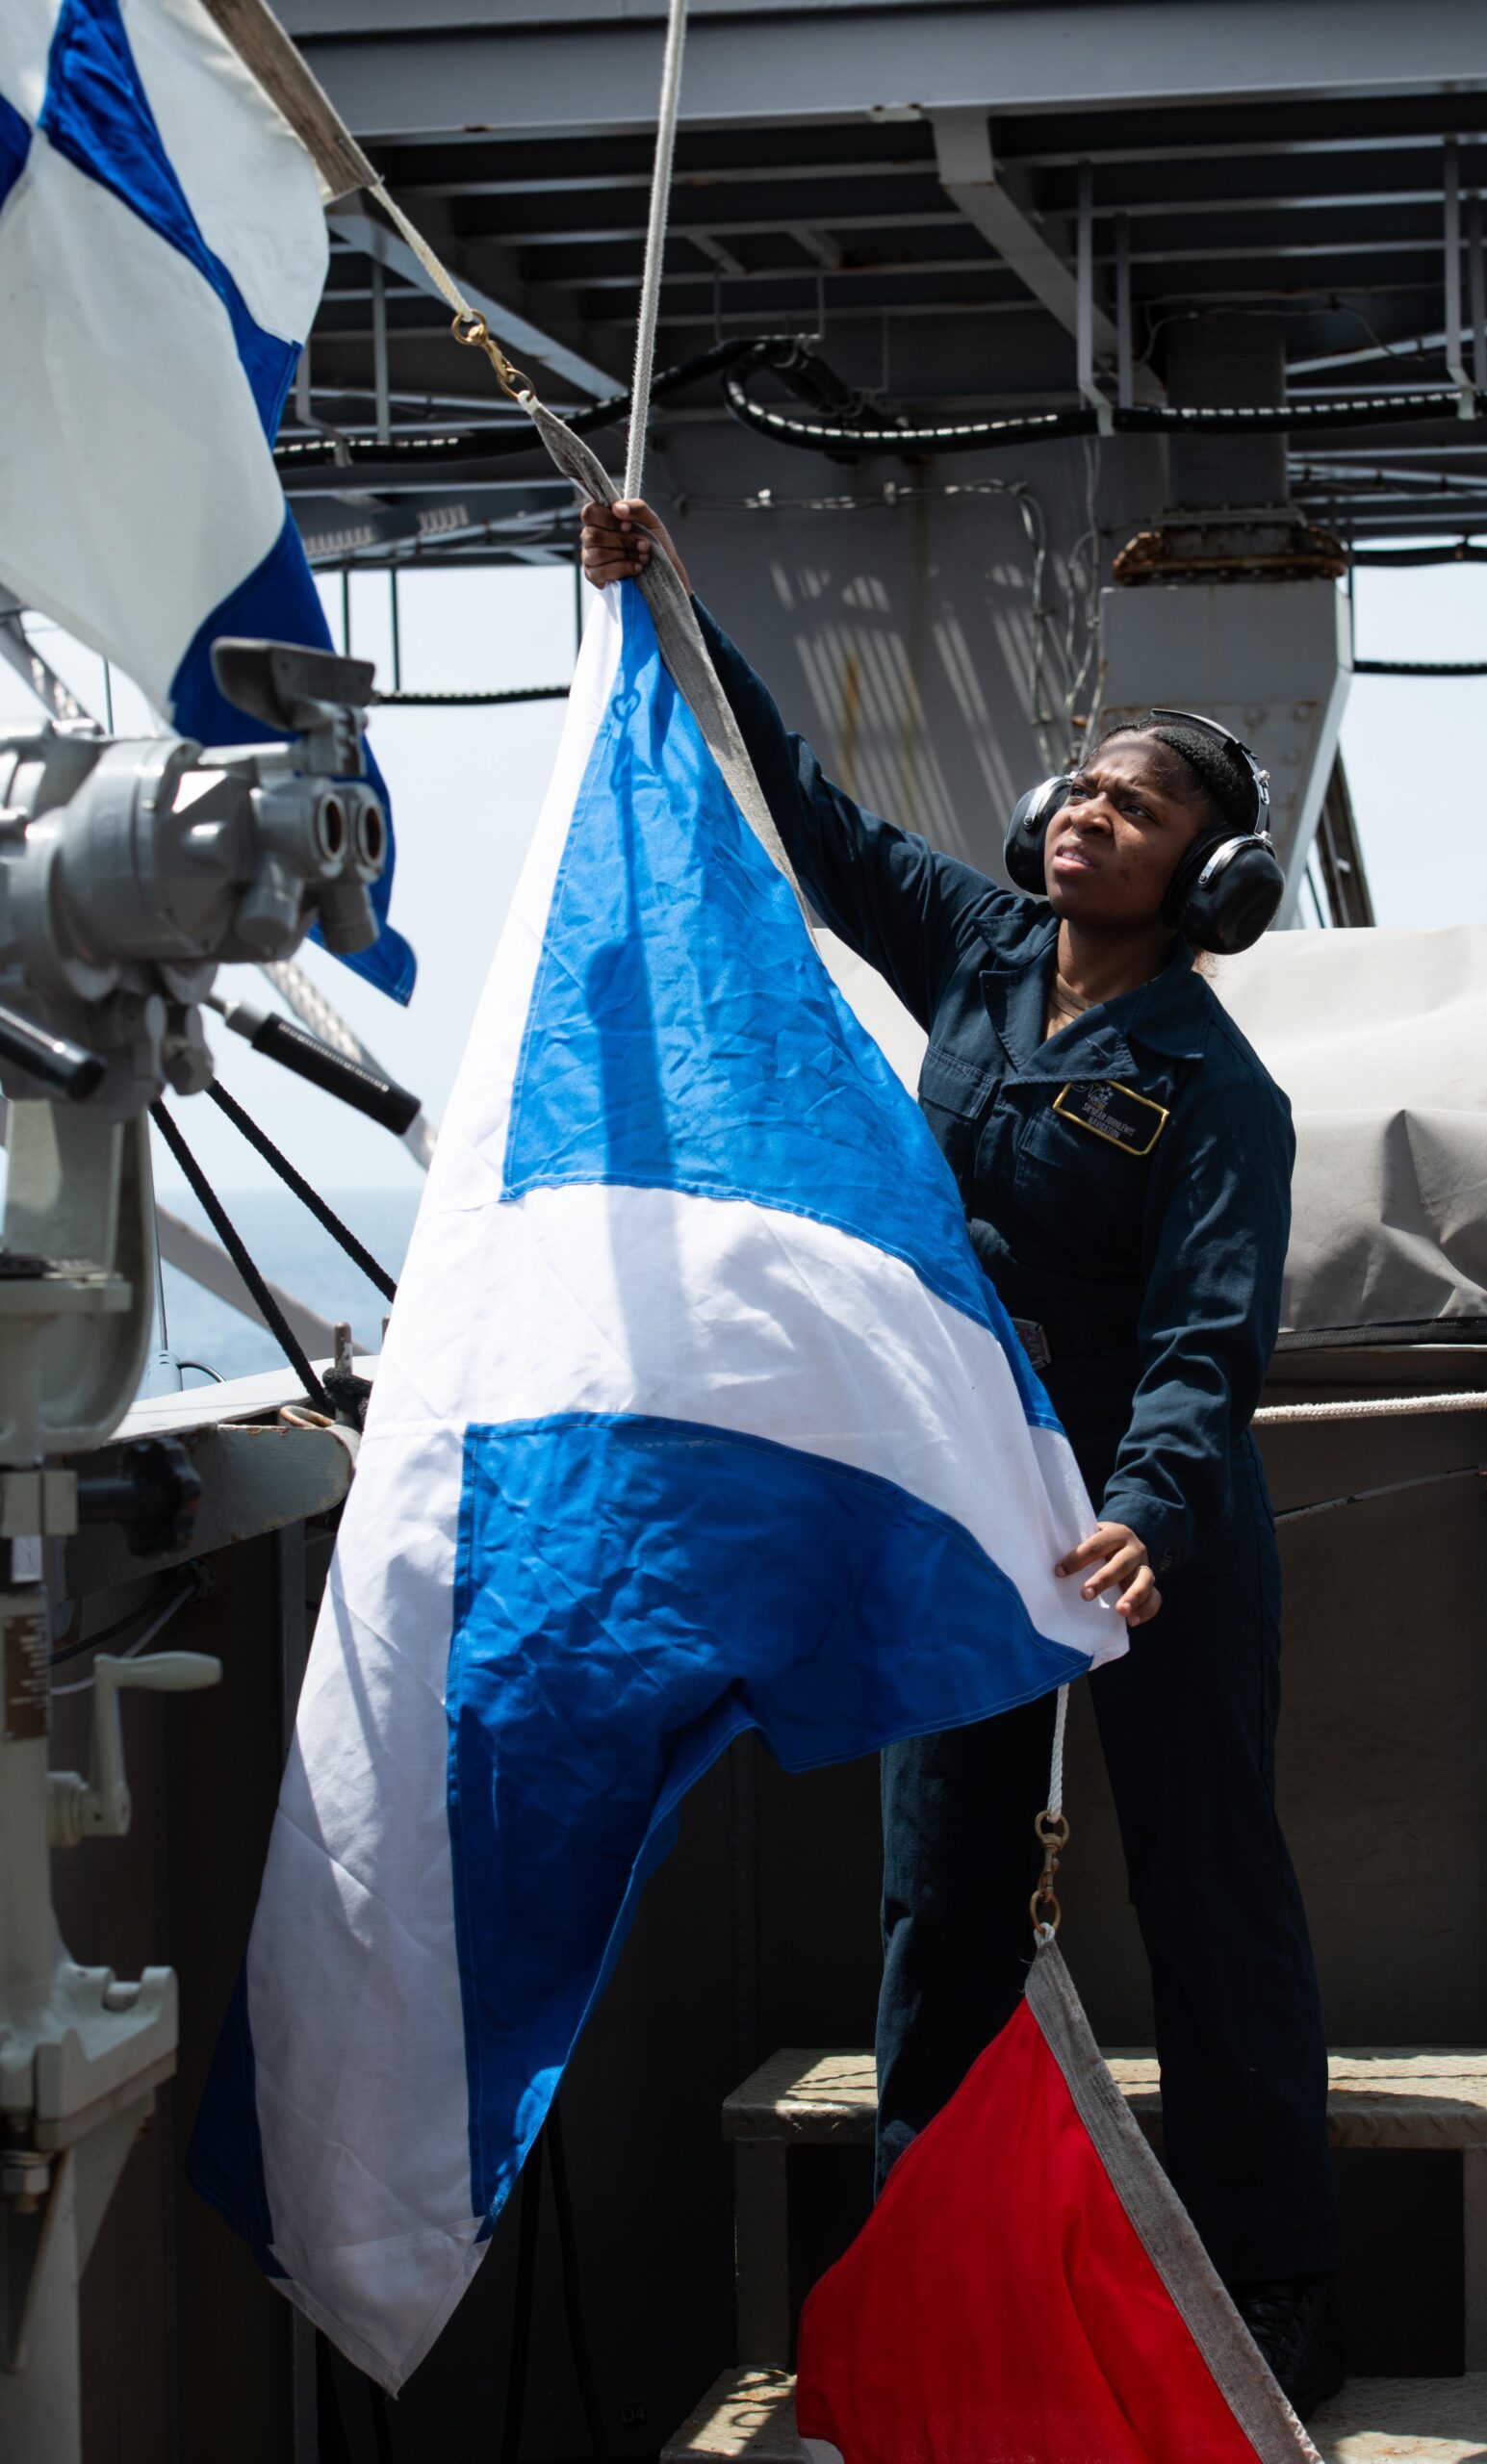 Quartermaster Seaman Sh'neah Johnlewis, from St. Croix, raises pennants aboard the aircraft carrier USS Nimitz on Wednesday in the South China Sea. (U.S. Navy photo by Mass Communication Specialist 2nd Class Caitlin Flynn)